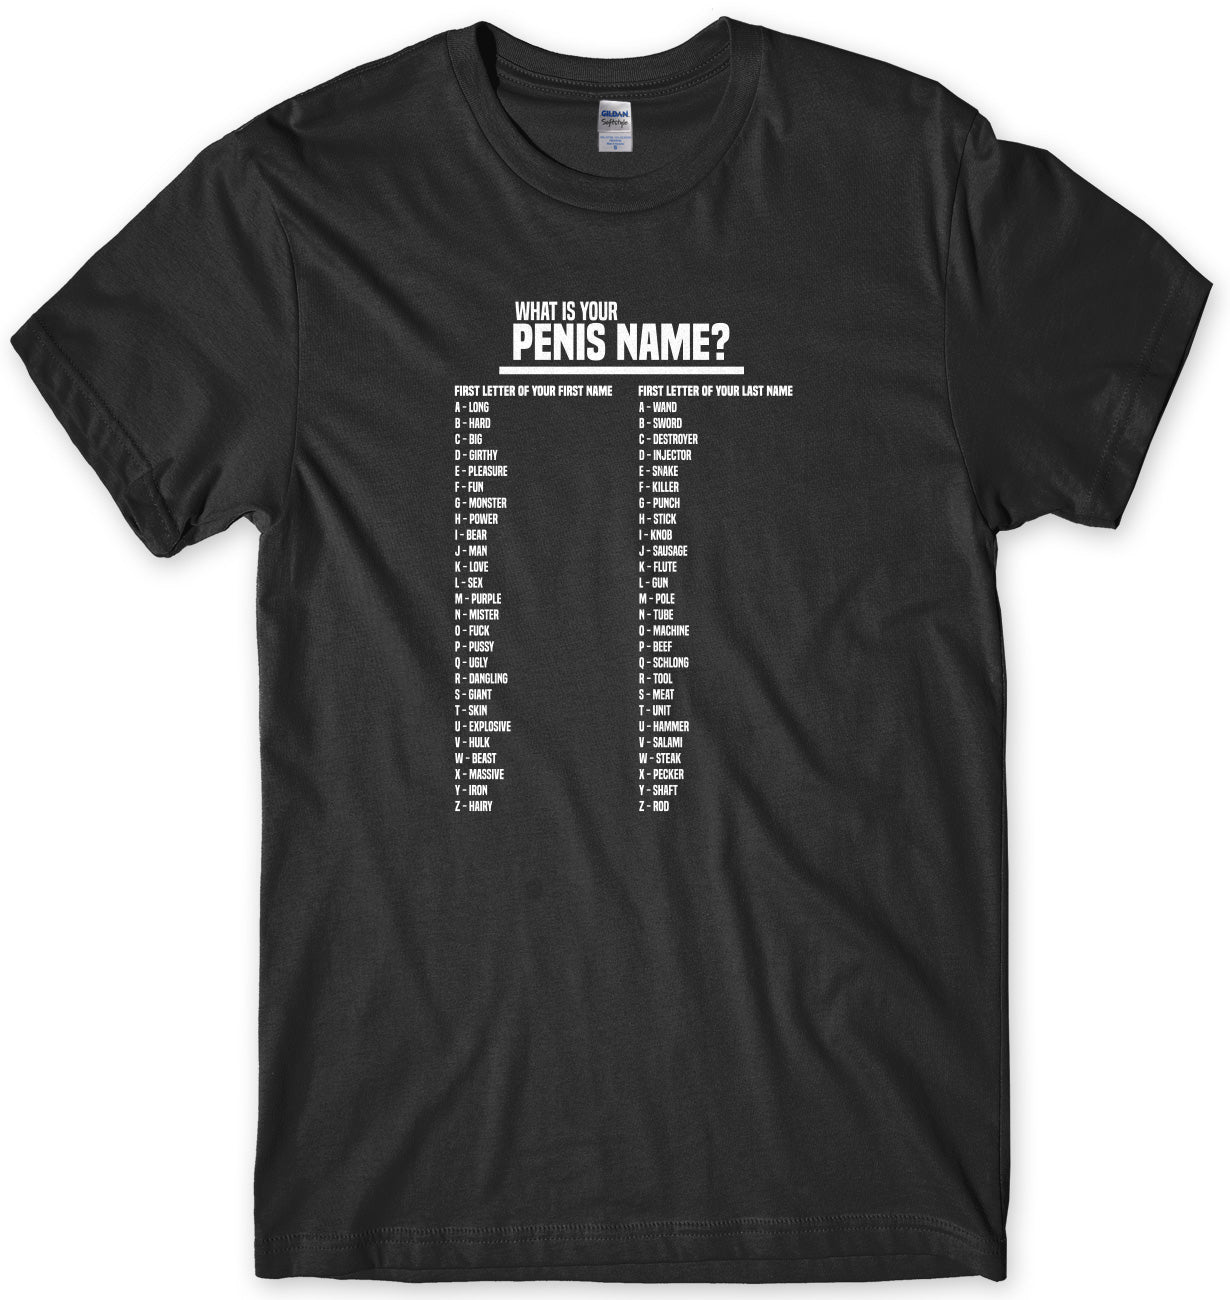 What Is Your Penis Name? Mens Unisex T-Shirt